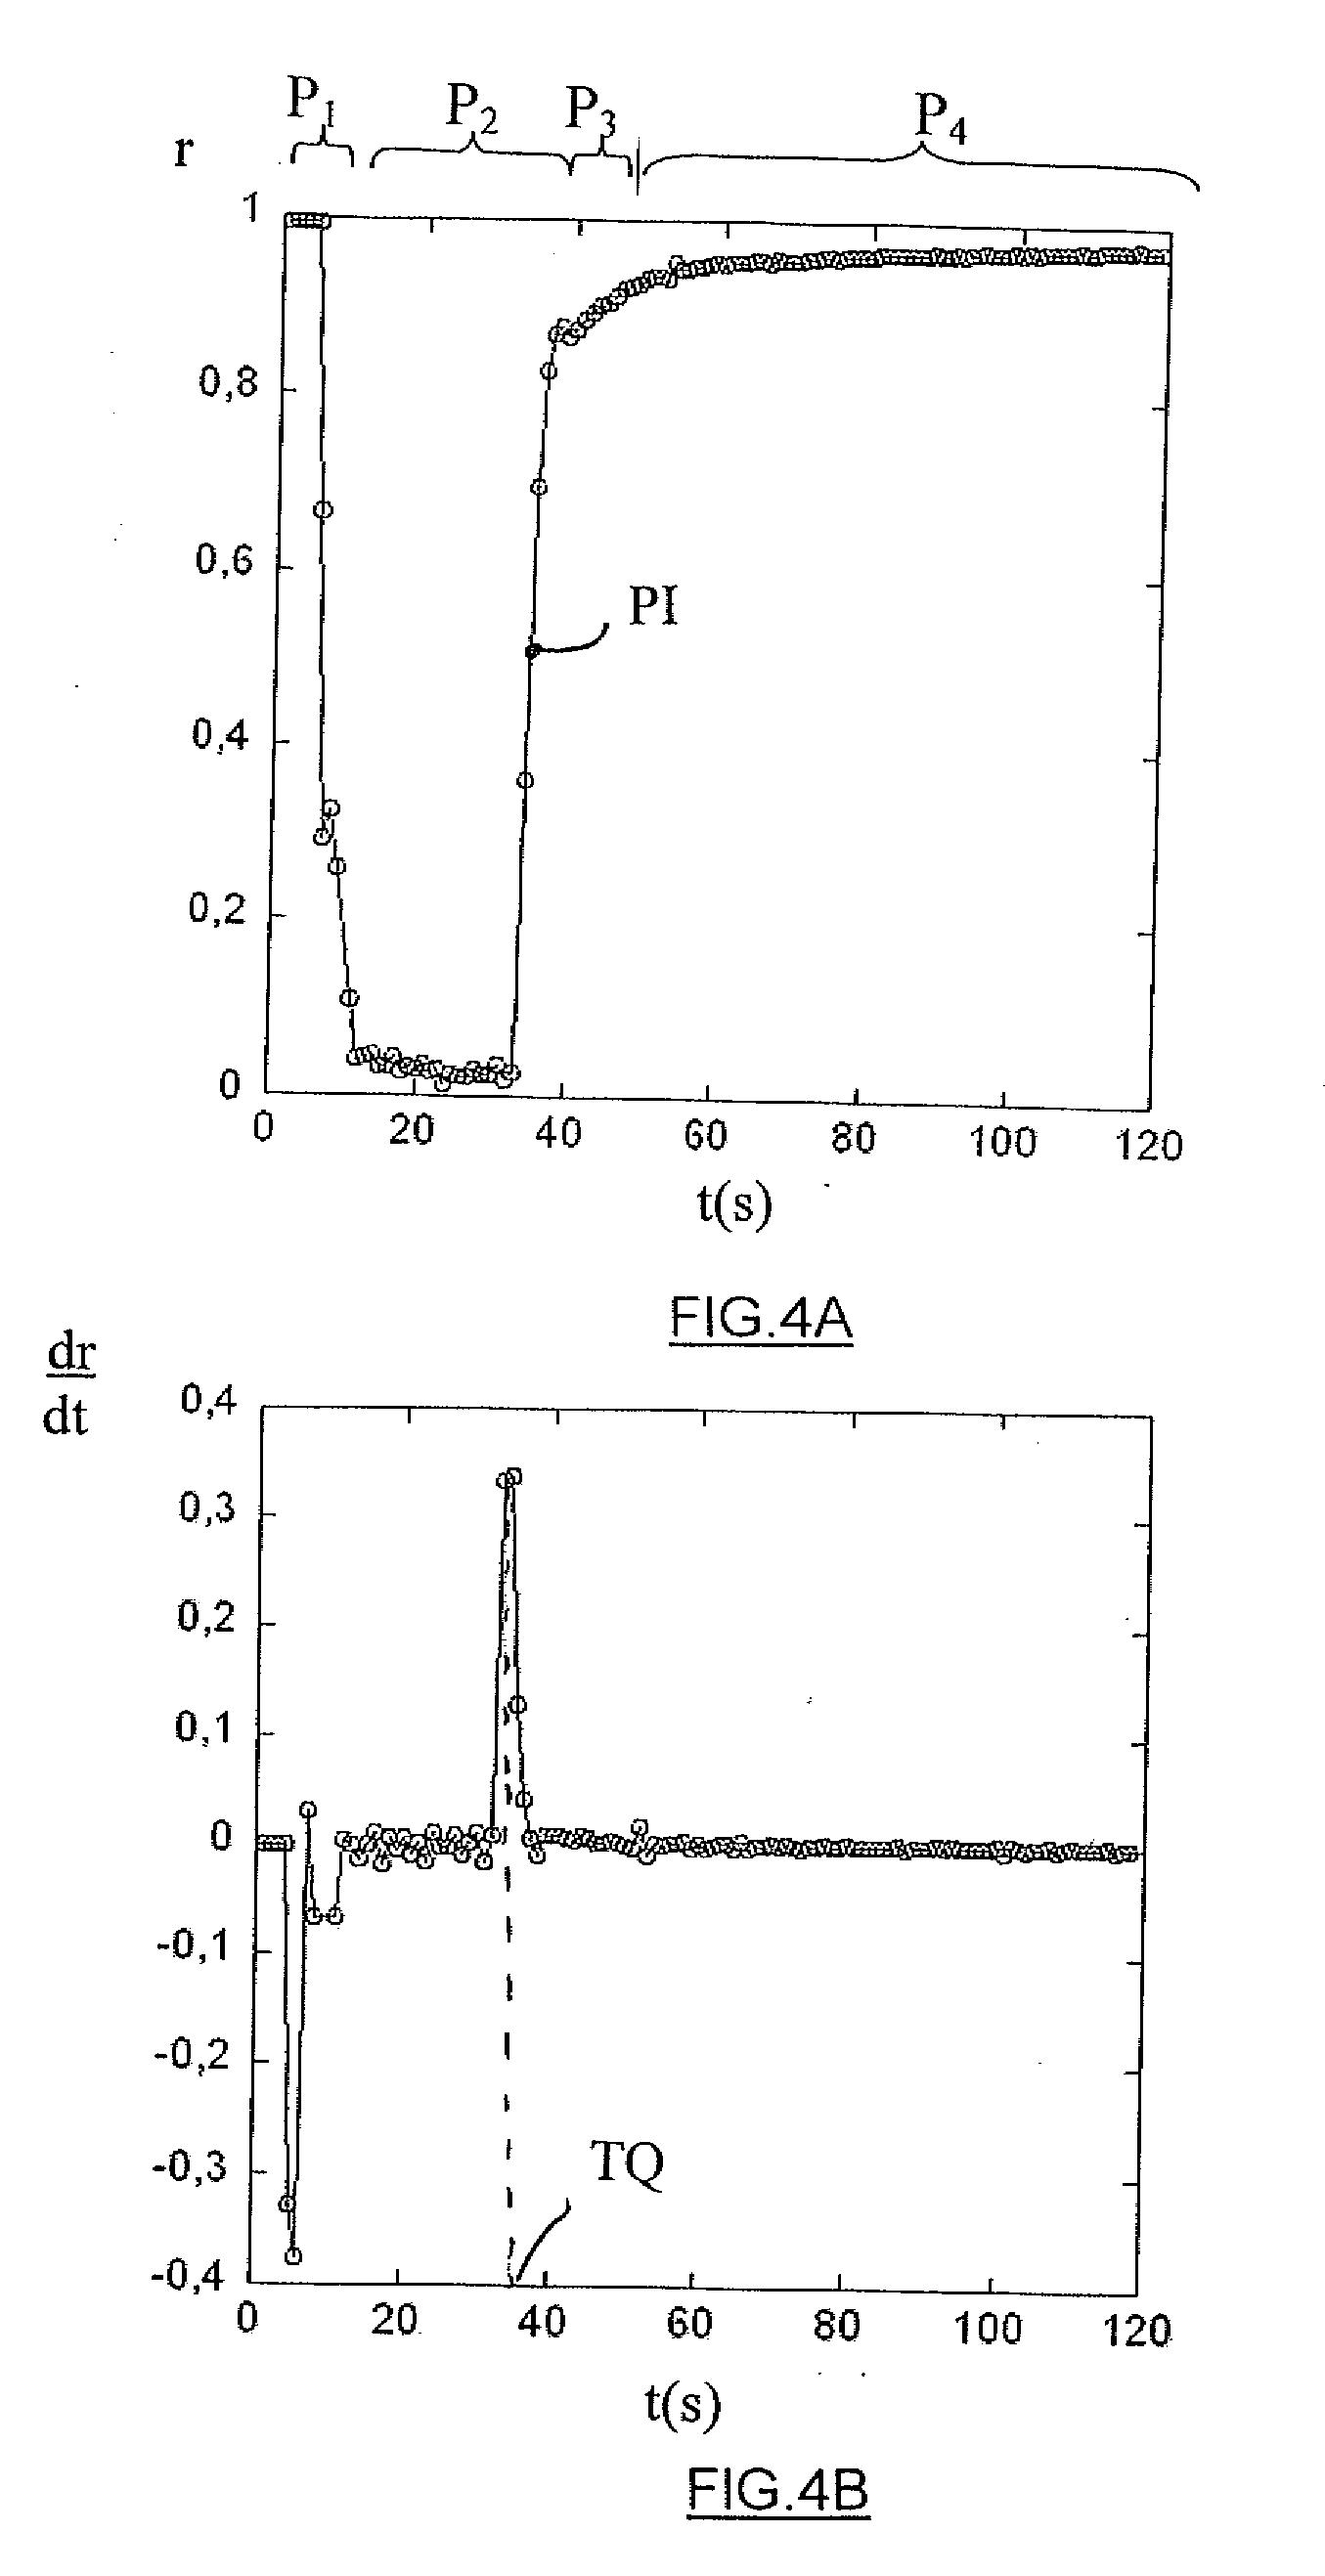 Method and a device for characterizing the coagulation or sedimentation dynamics of a fluid such as blood or blood plasma